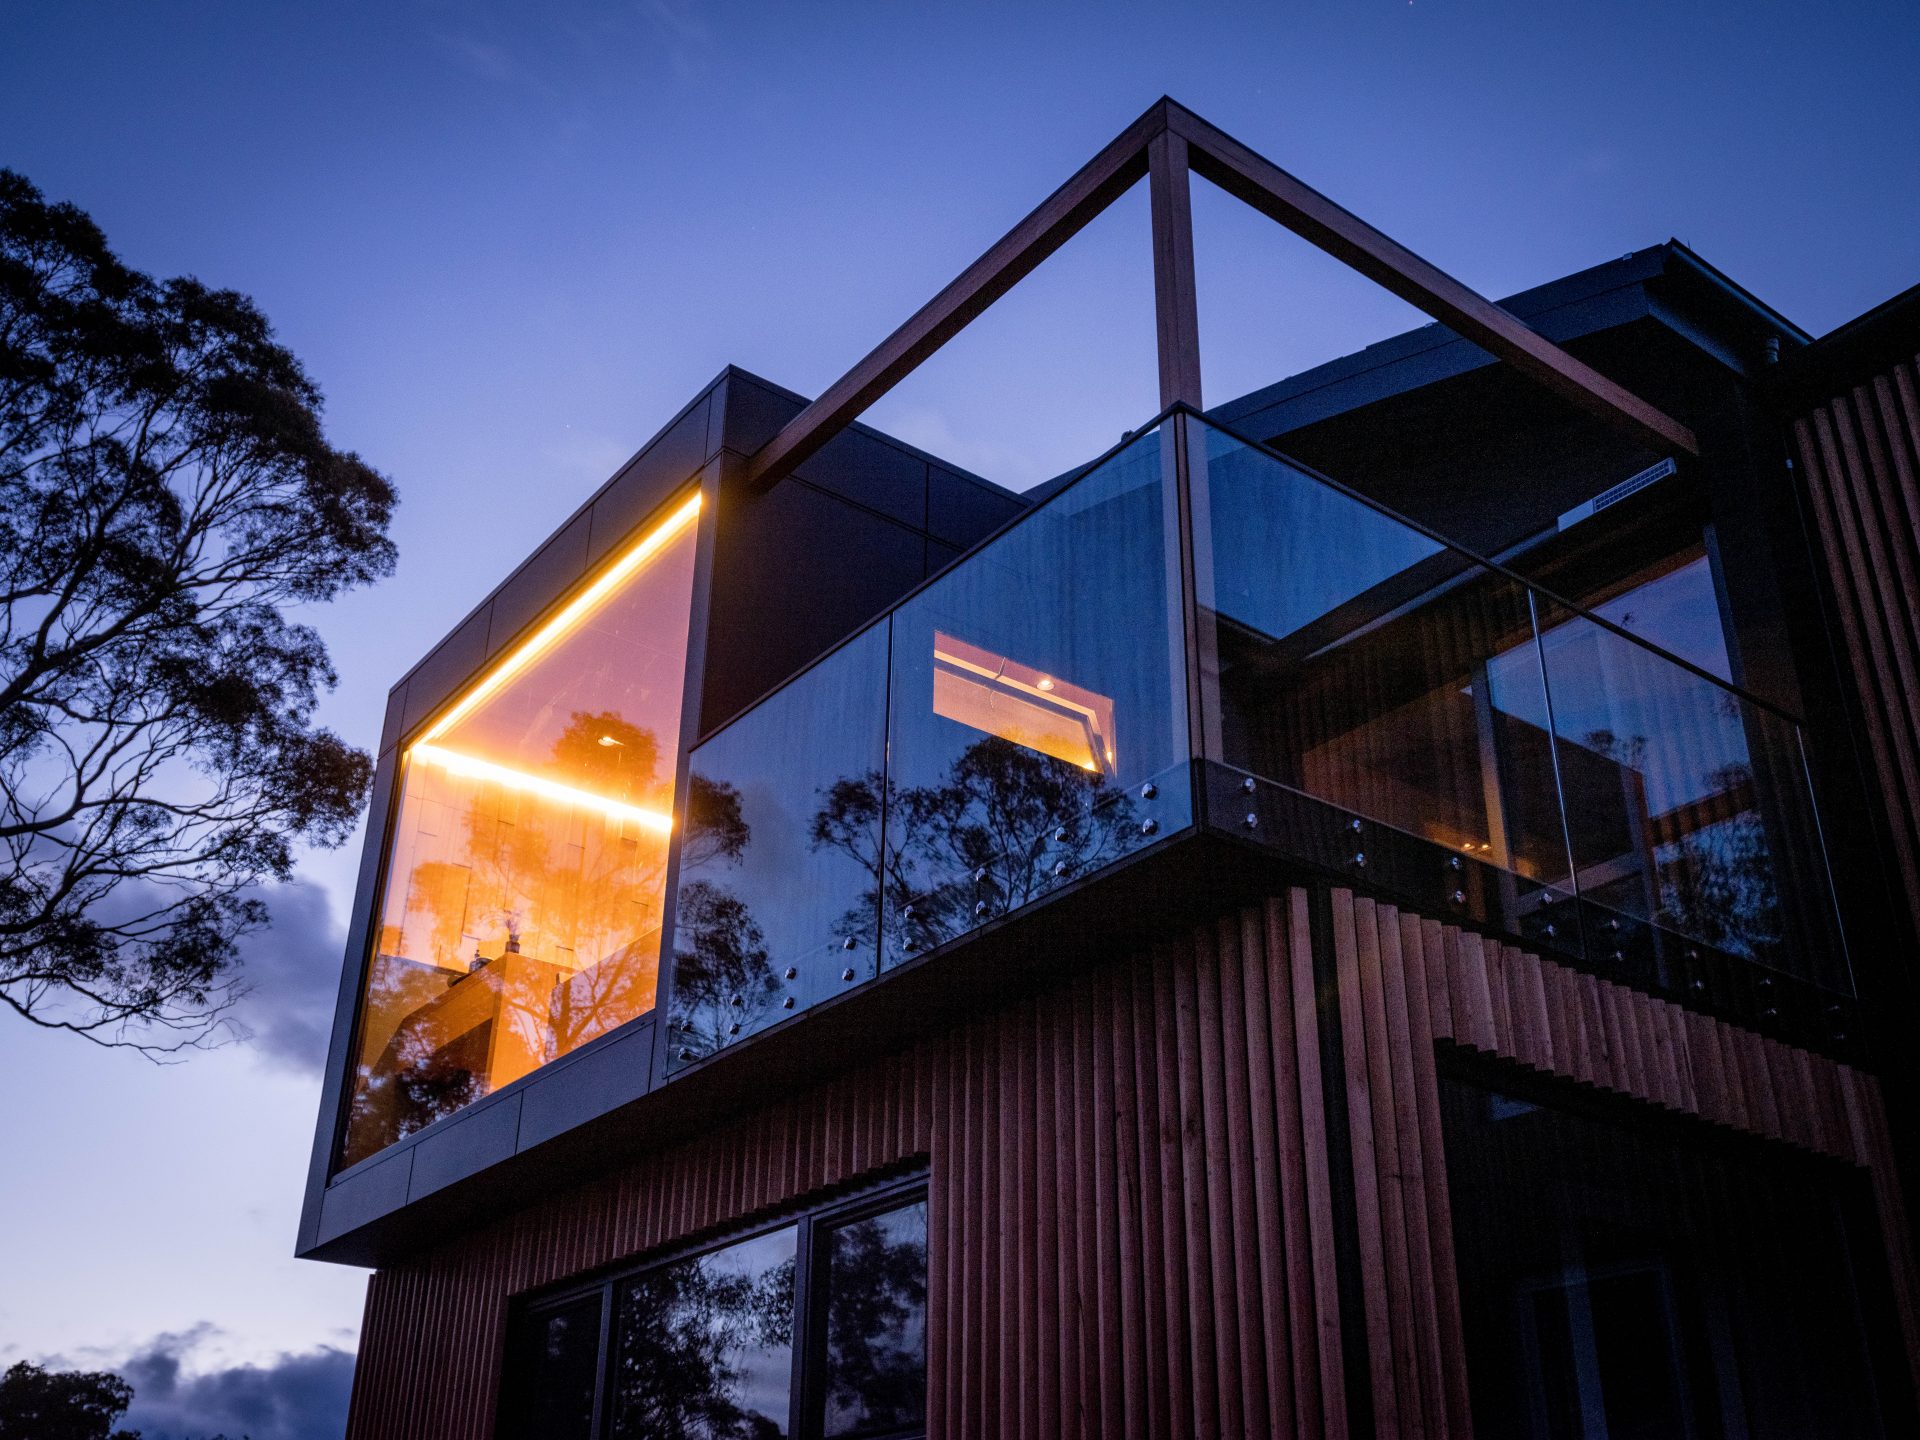 HomeBuilder Extension and Tassie Builders Steal the Show